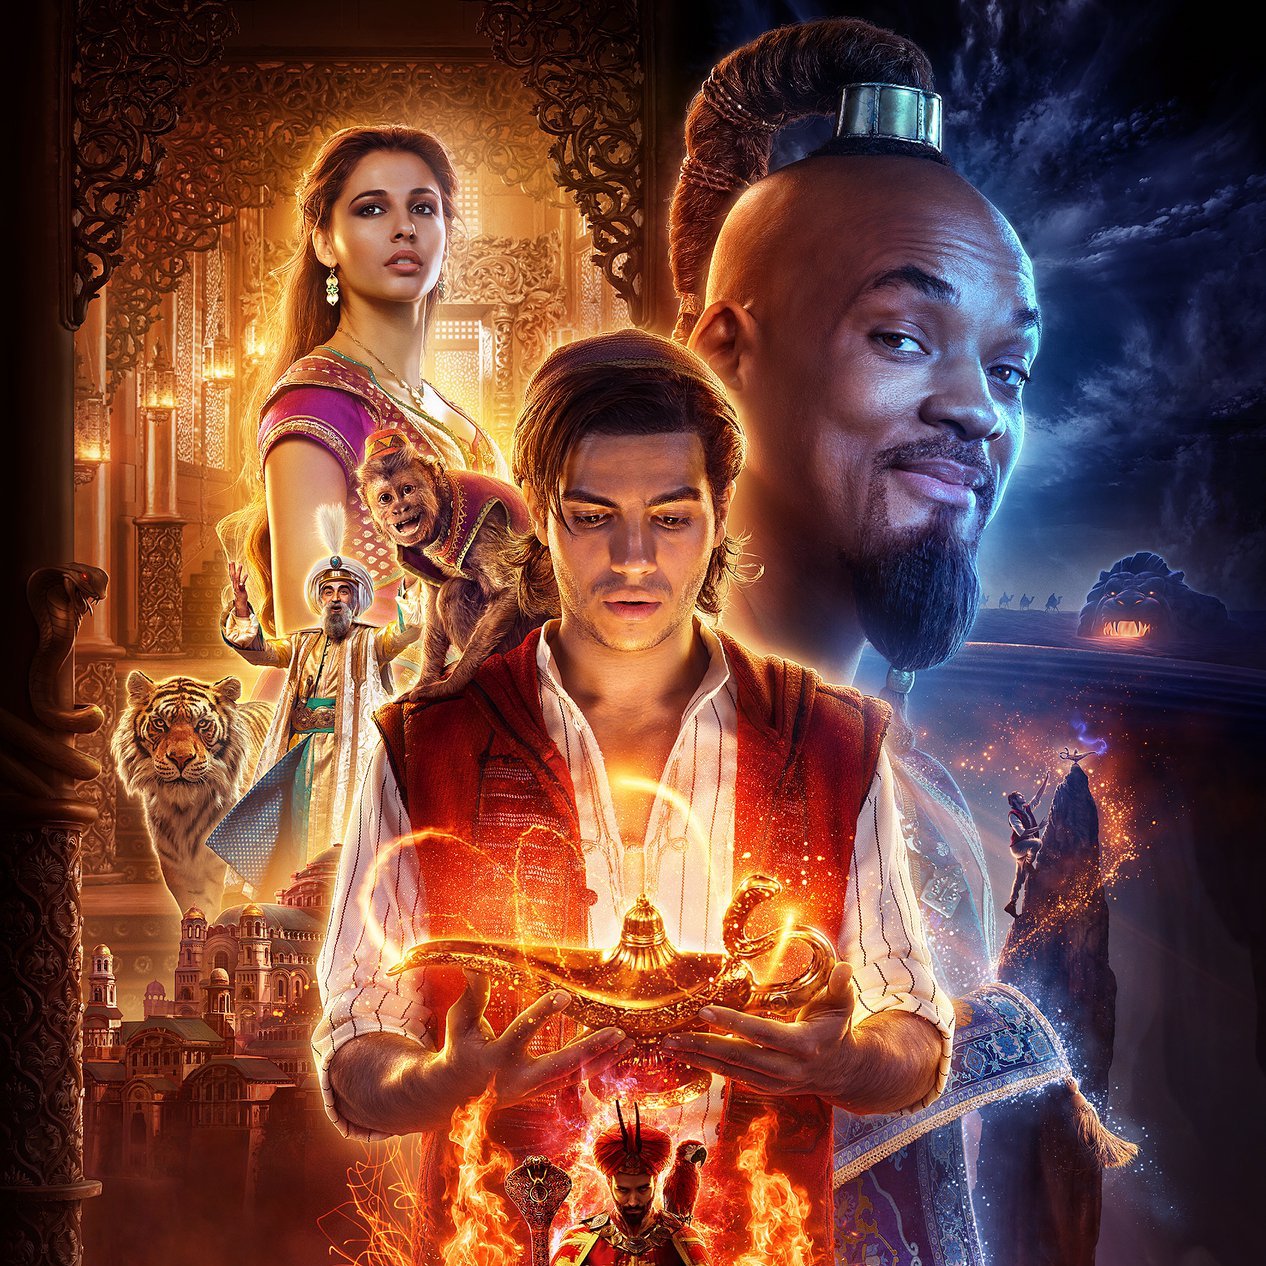 The Hit House's contribution to Disney's "Aladdin" Official Trailer.